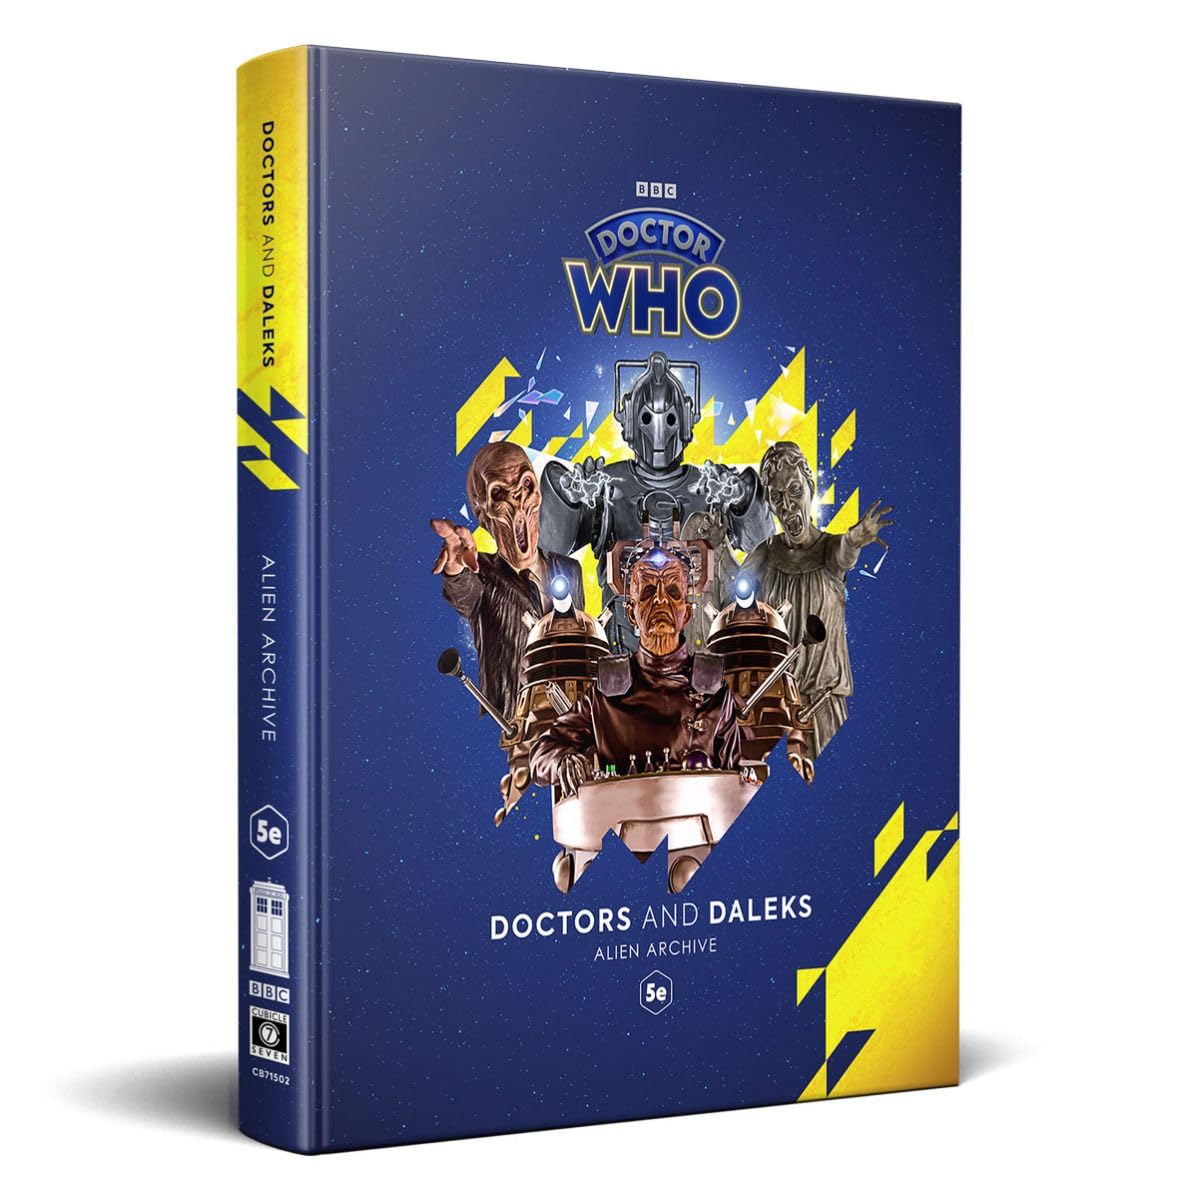 Cubicle 7 Role Playing Games Cubicle 7 Doctor Who RPG: Doctors and Daleks - Alien Archive (5E)